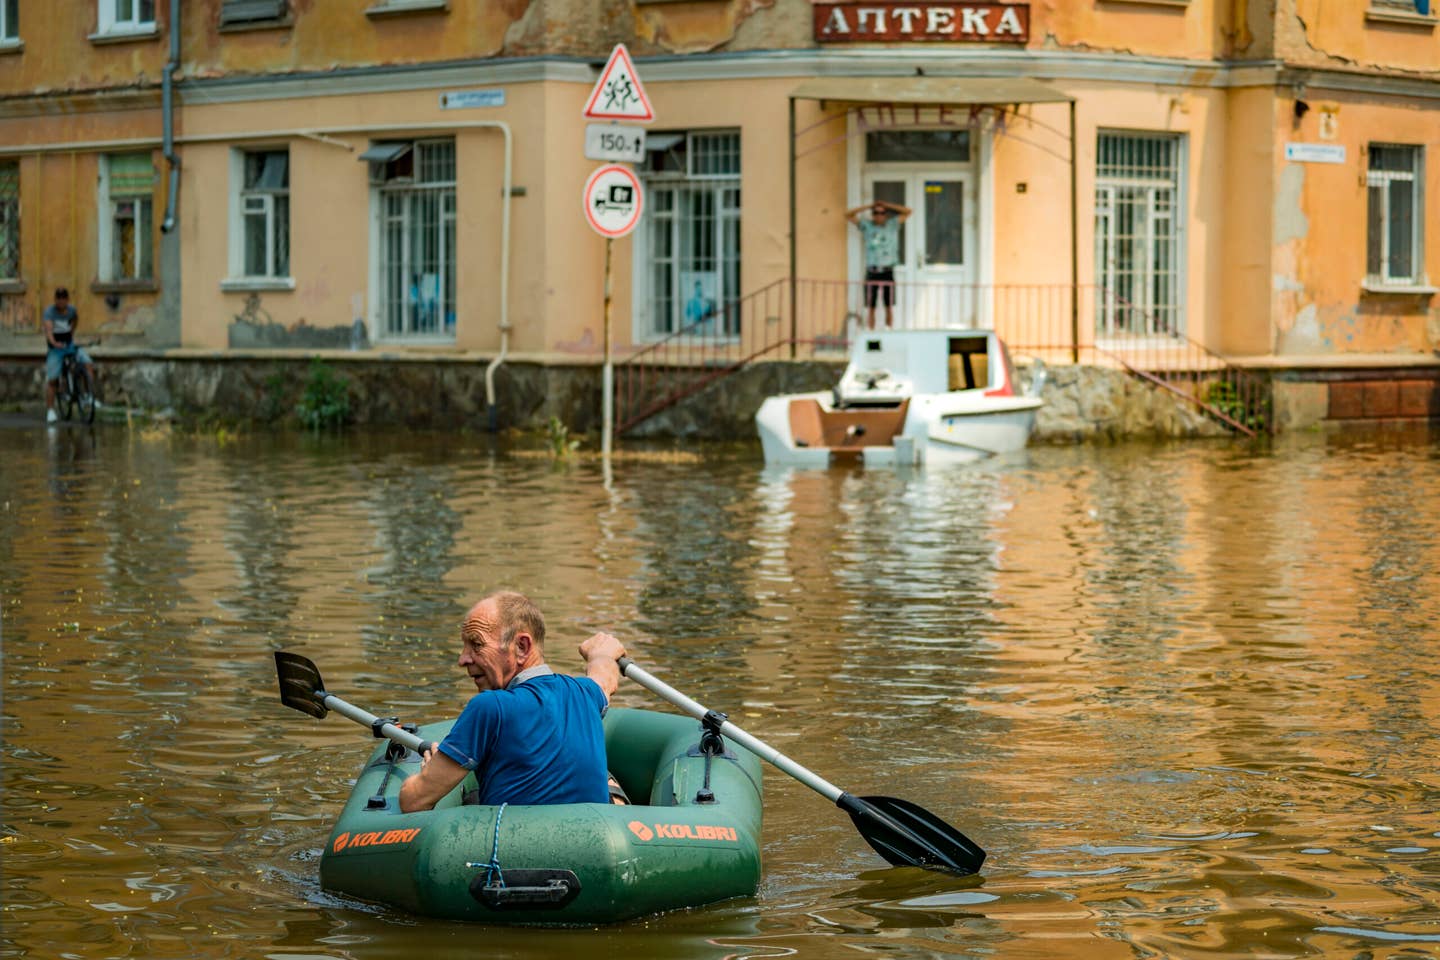 A man rows with a small boat among the flooded streets in Kherson city because the collapsed Nova Kakhovka dam upstream the Dnipro river. (Photo by Celestino Arce/NurPhoto via Getty Images)